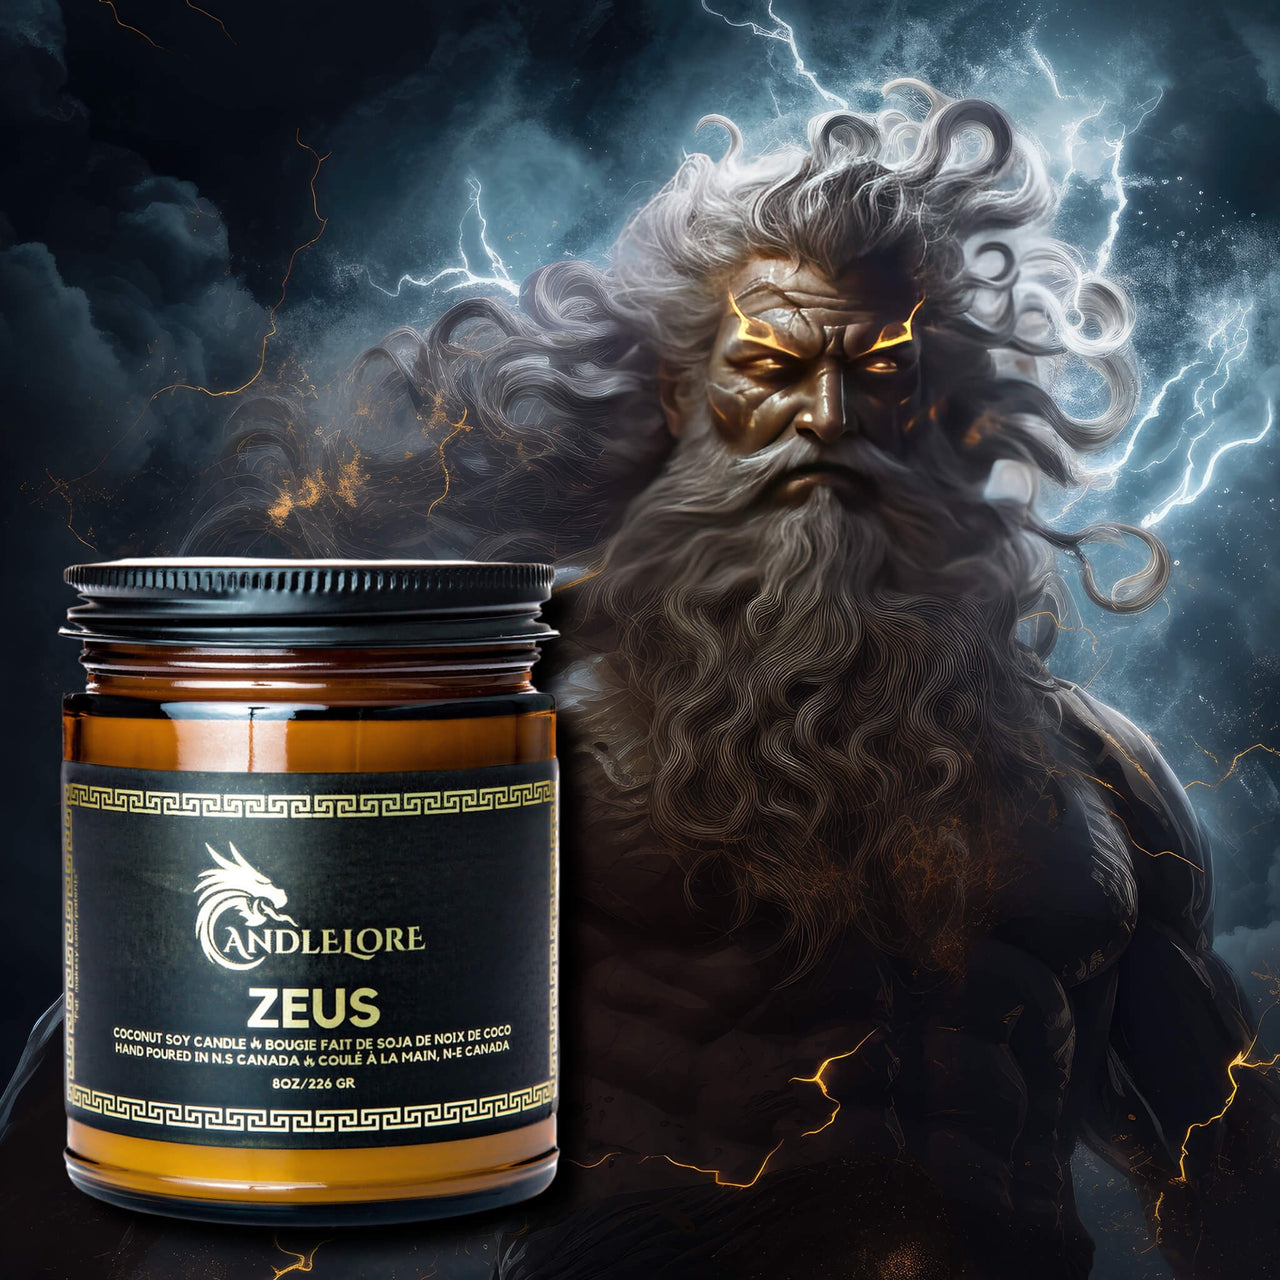 Zeus behind a candle